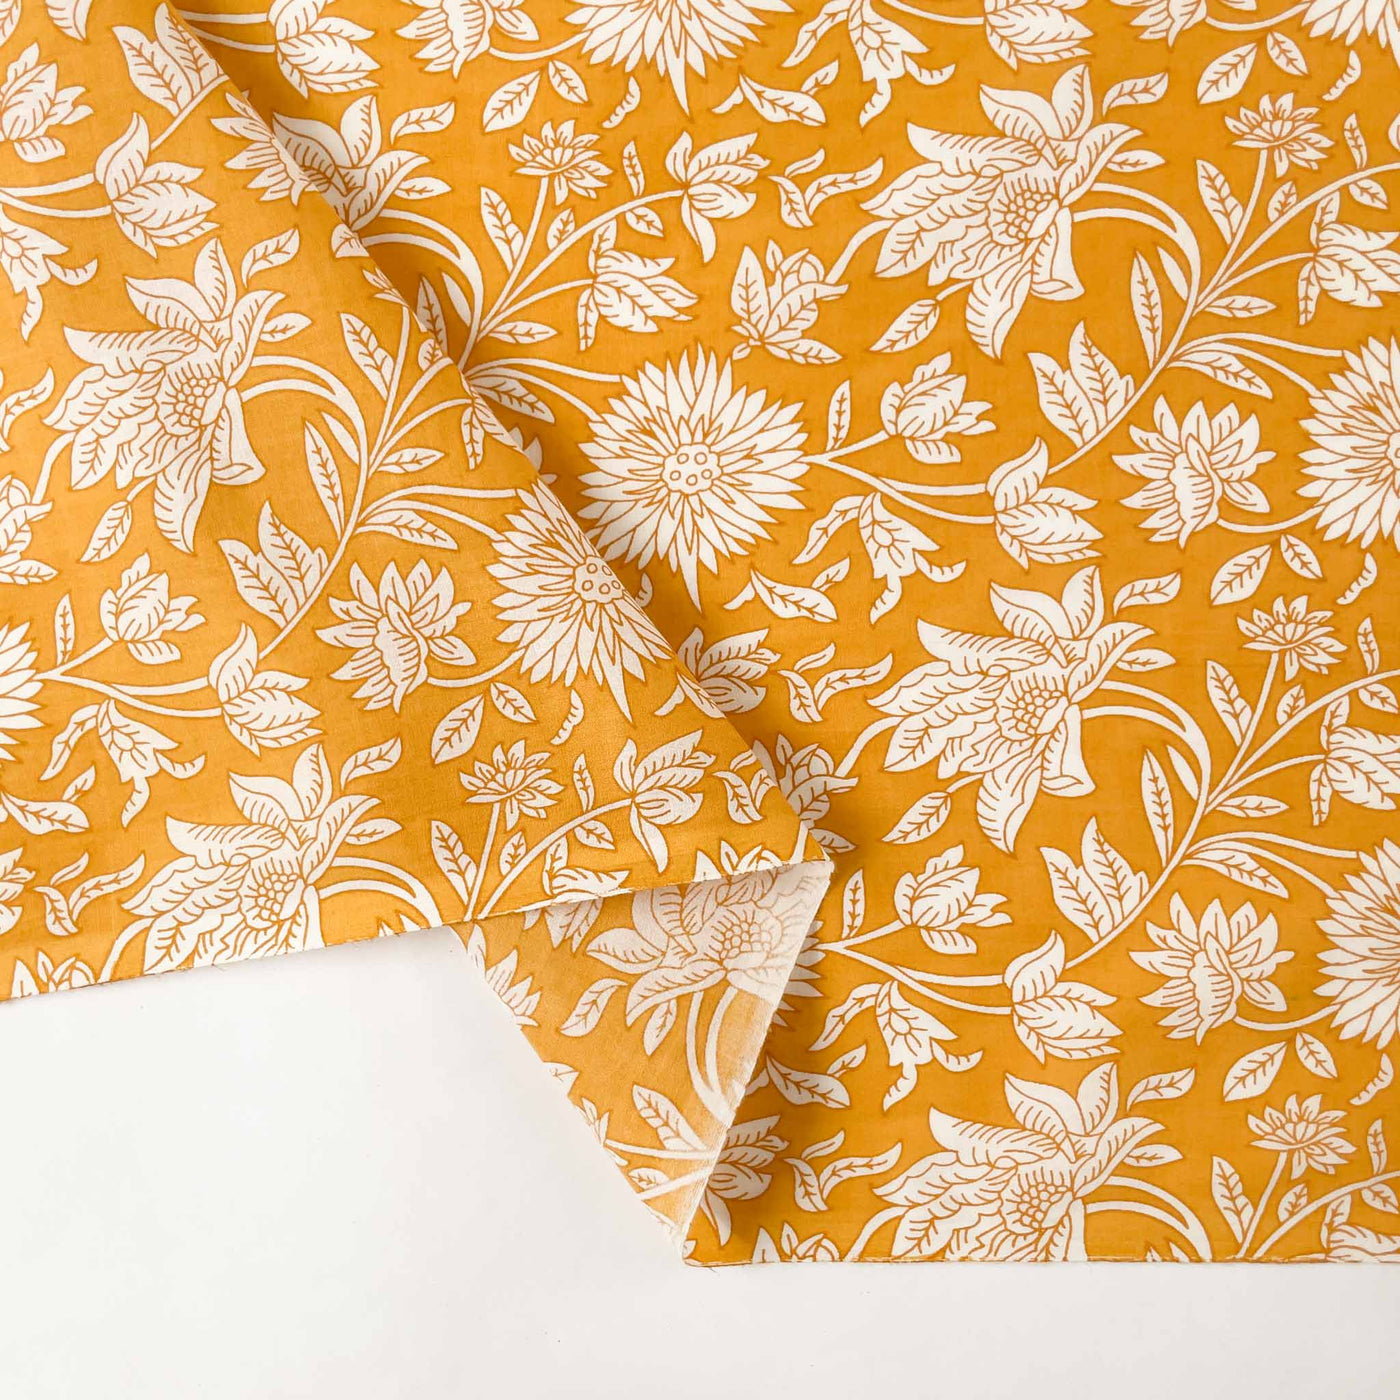 Screen Printed Cotton Fabric Cut Piece (CUT PIECE) Mango Yellow & White Sunflowers and Lilies Screen Printed Pure Cotton Fabric (Width 43 inches)